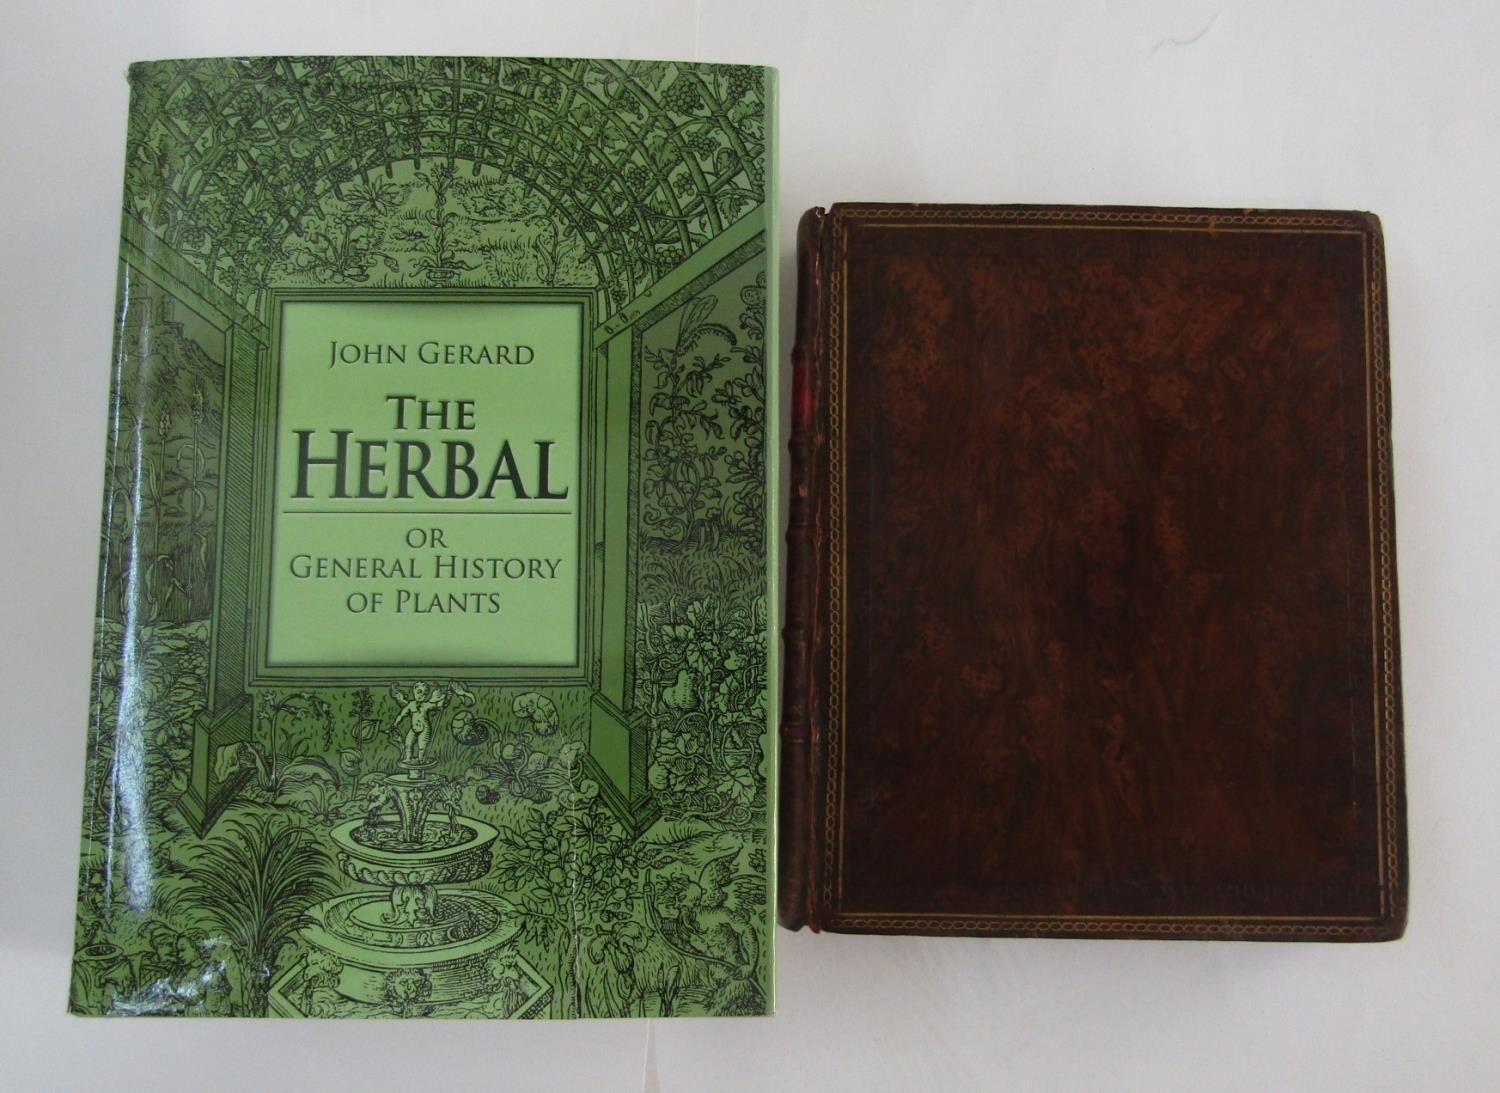 An early 19th century leather bound edition of Culpeper's Complete Herbal, published by Richard